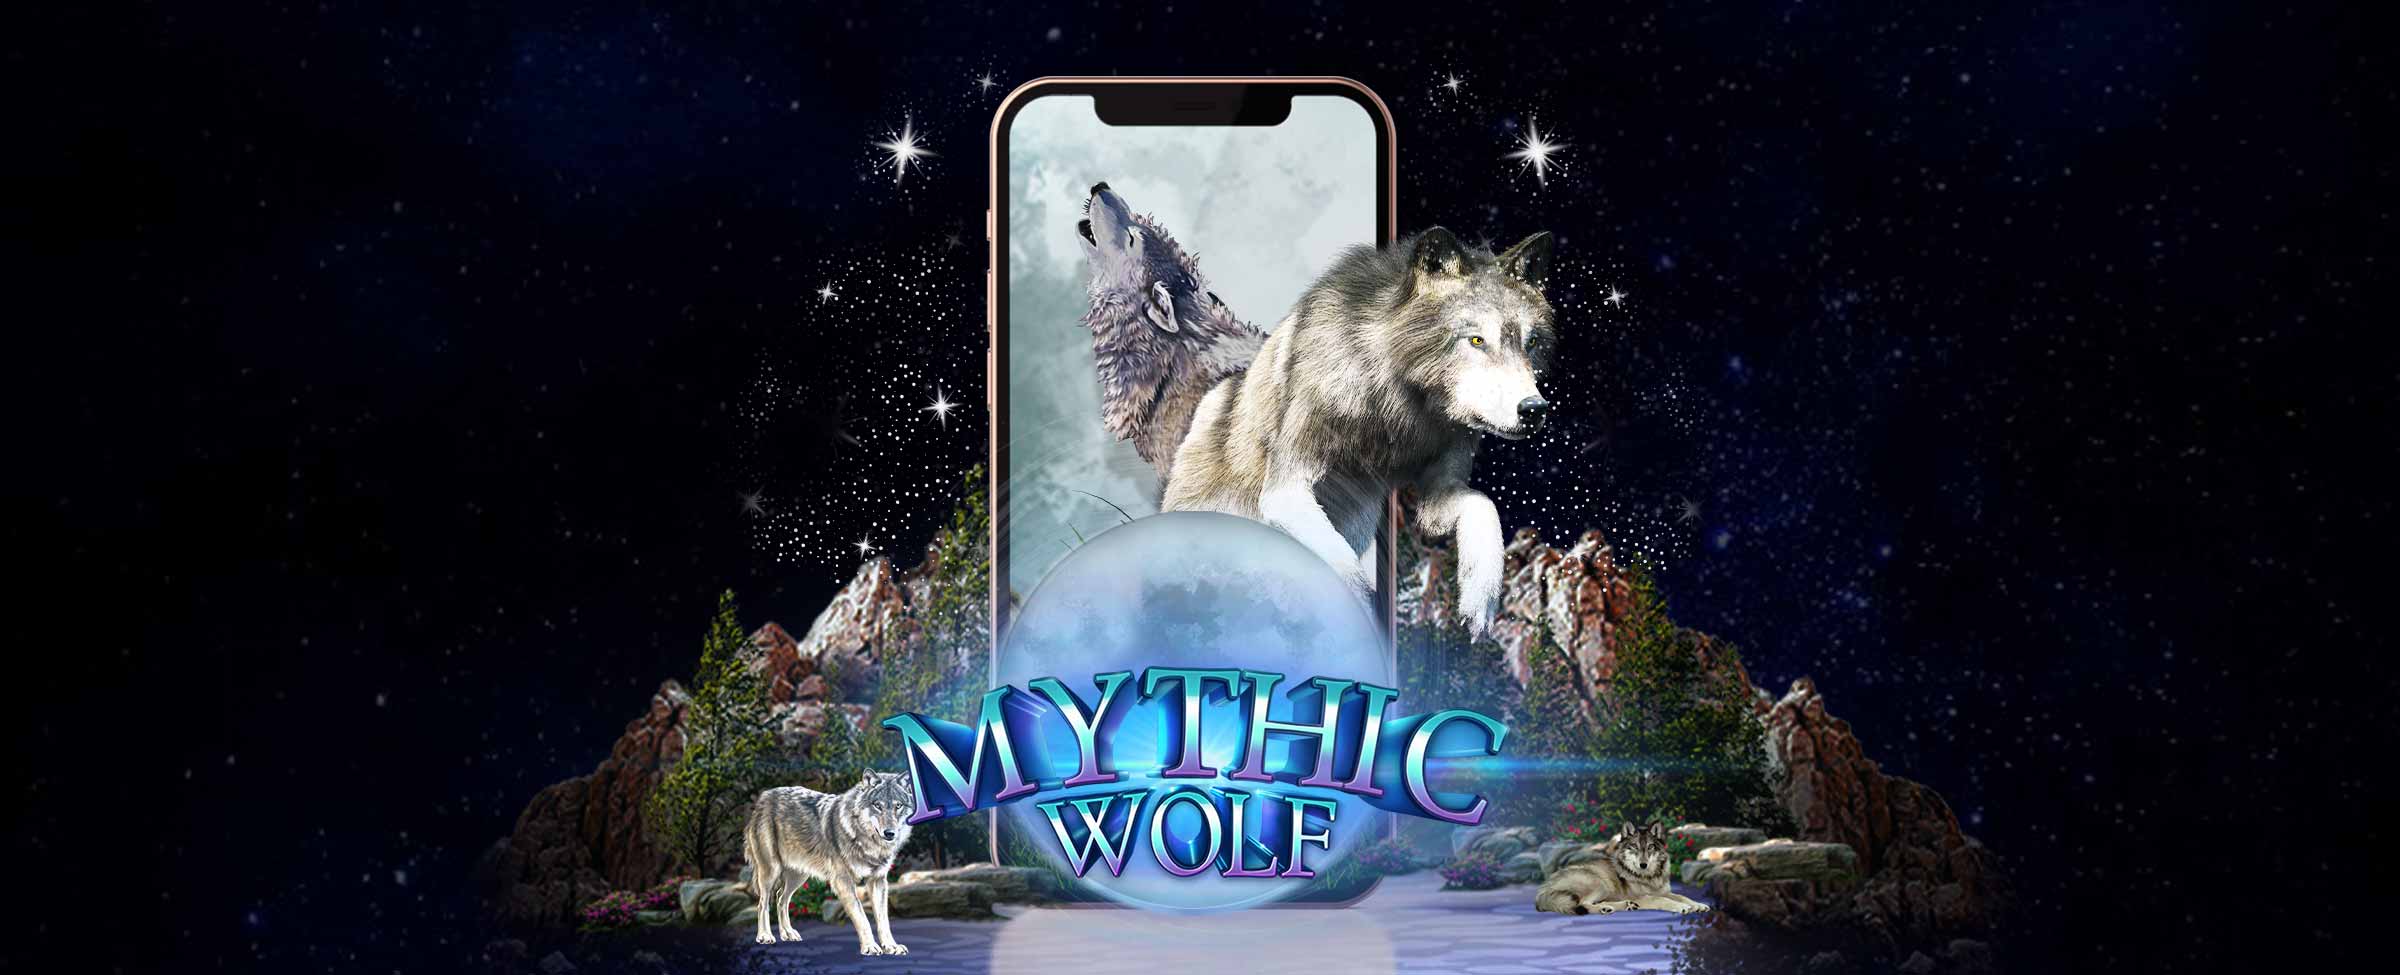 Big wins will have you howling with Mythic Wolf!